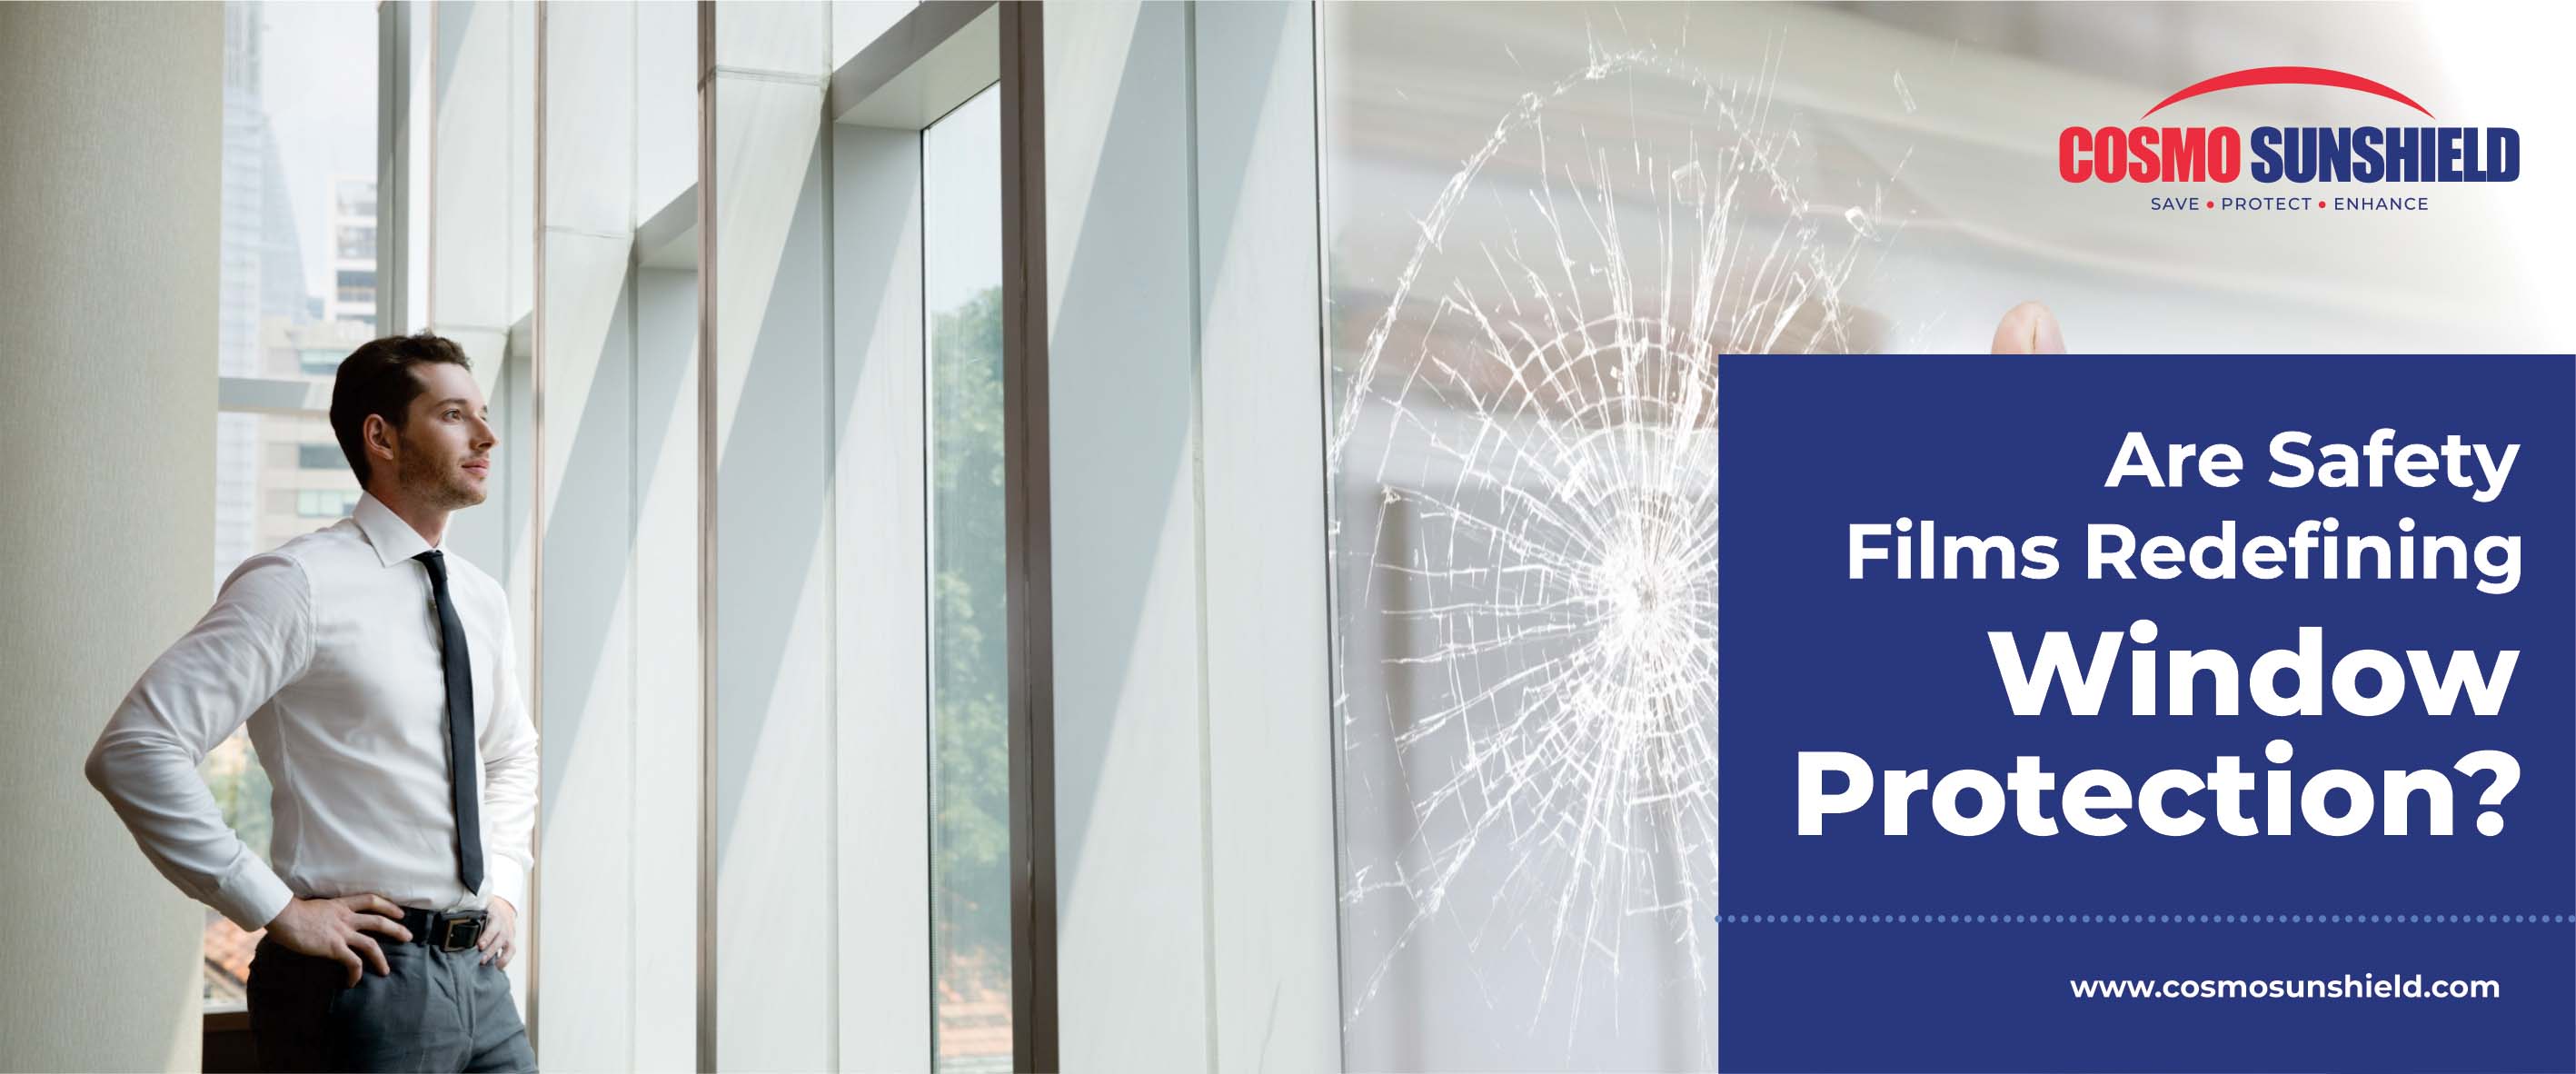 Are Safety Films Redefining Window Protection